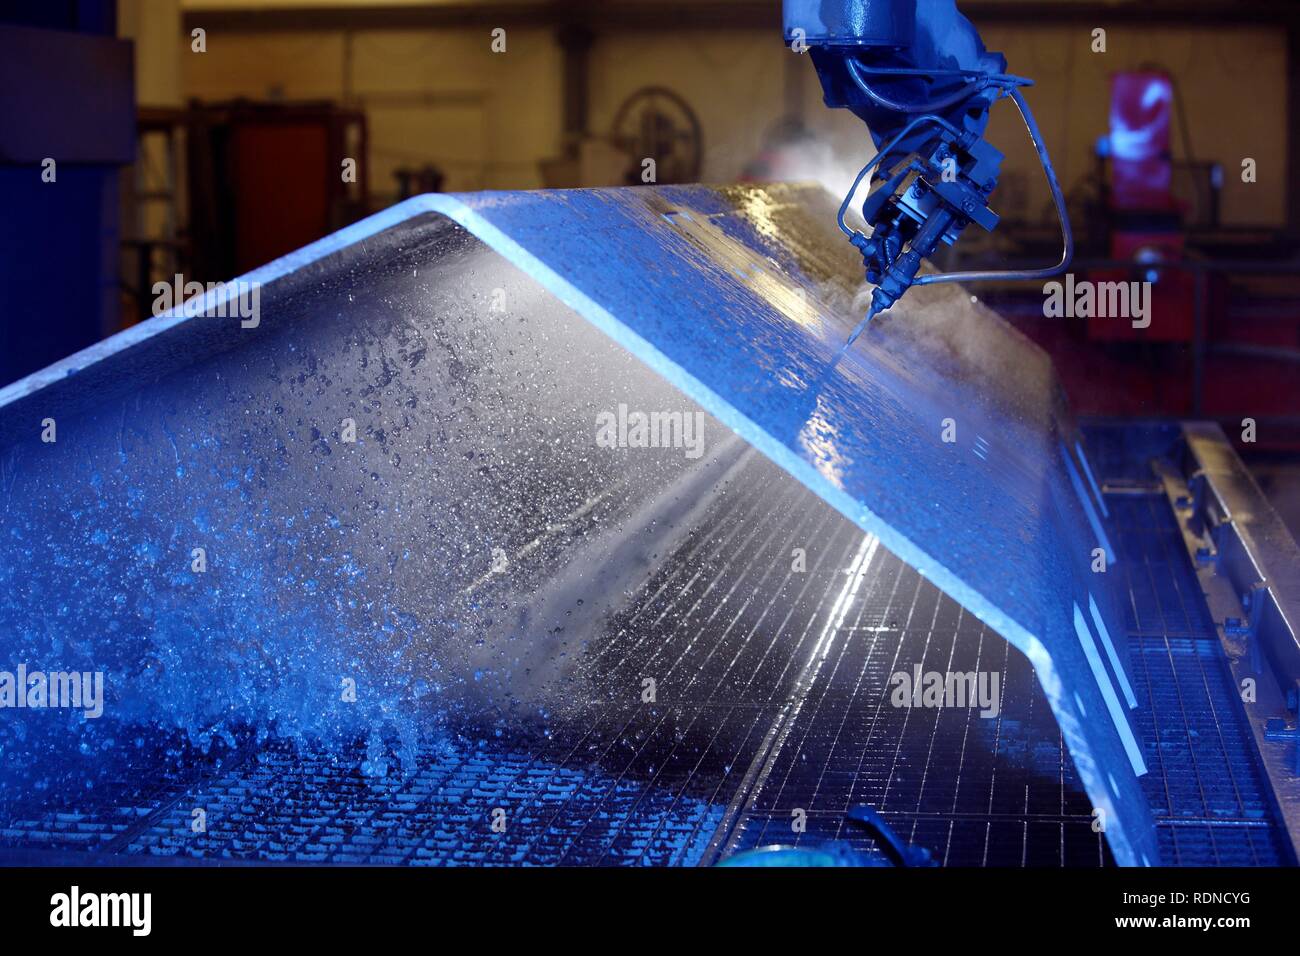 Water jet technology, precise technology for cutting metal with a high pressure water jet, where an abrasive material is added Stock Photo